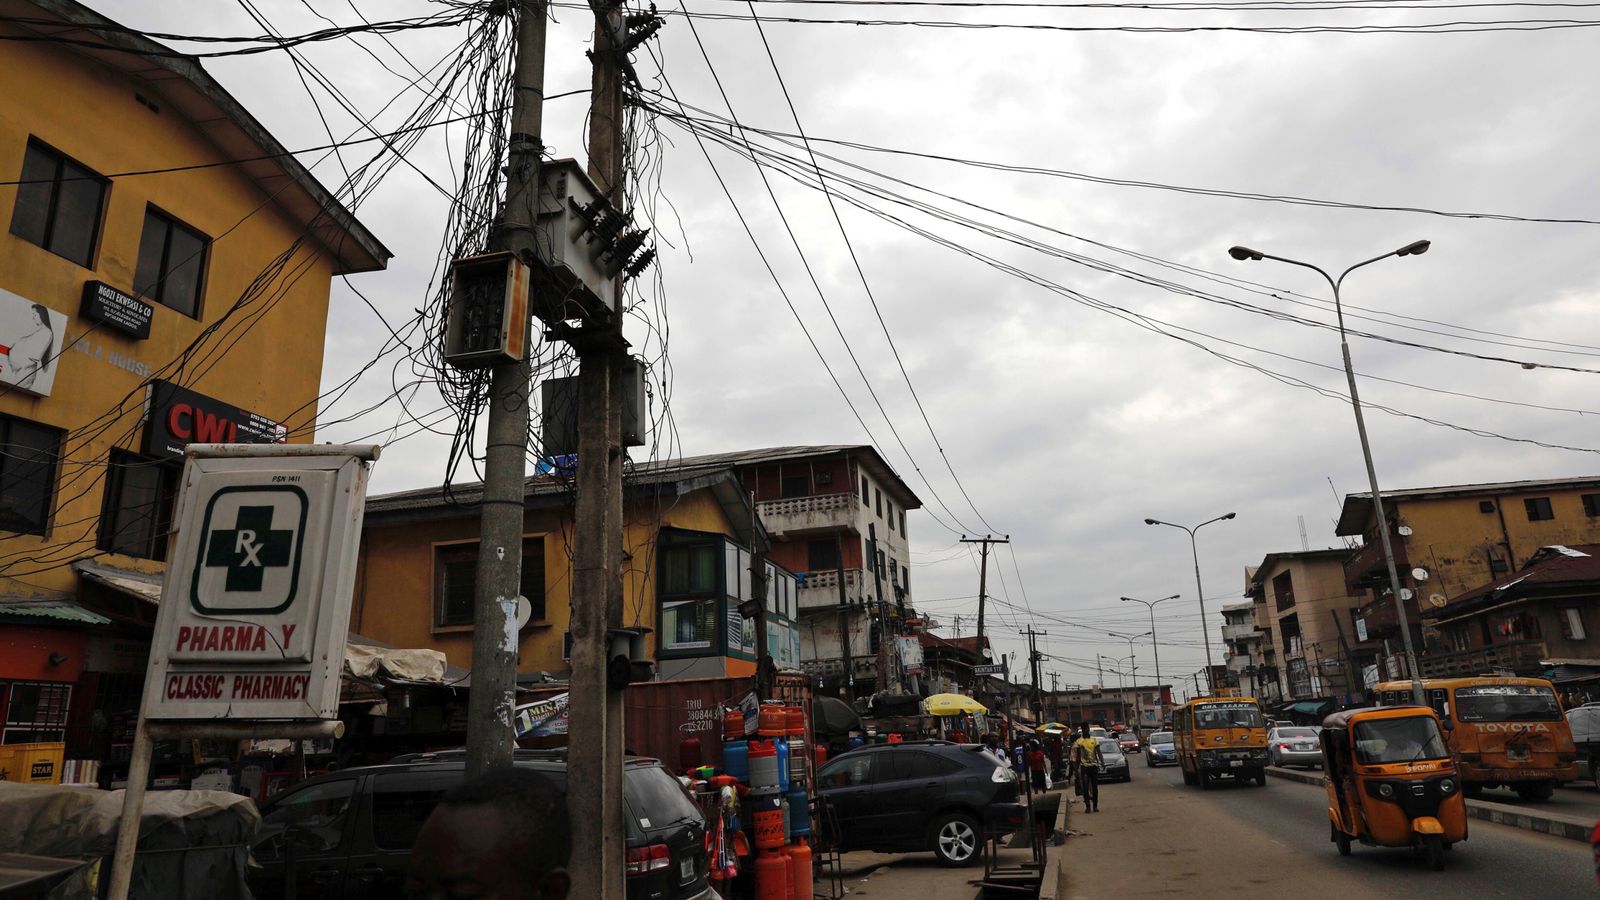 Nigeria suffers from nationwide power outage after 'total system collapse'